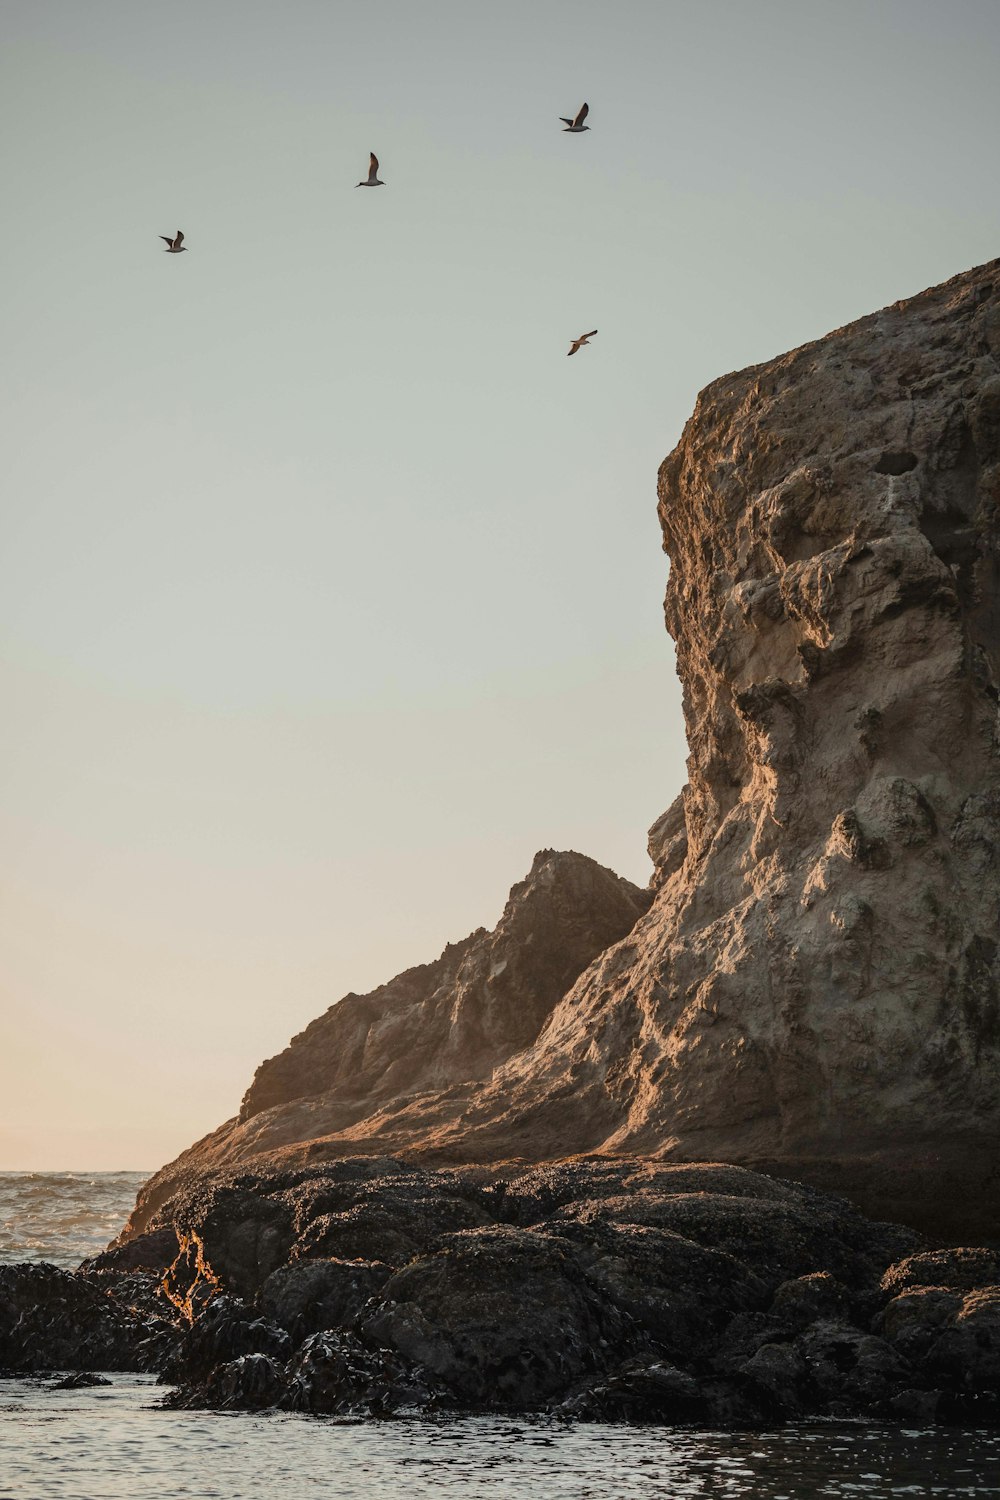 birds flying over a rocky cliff